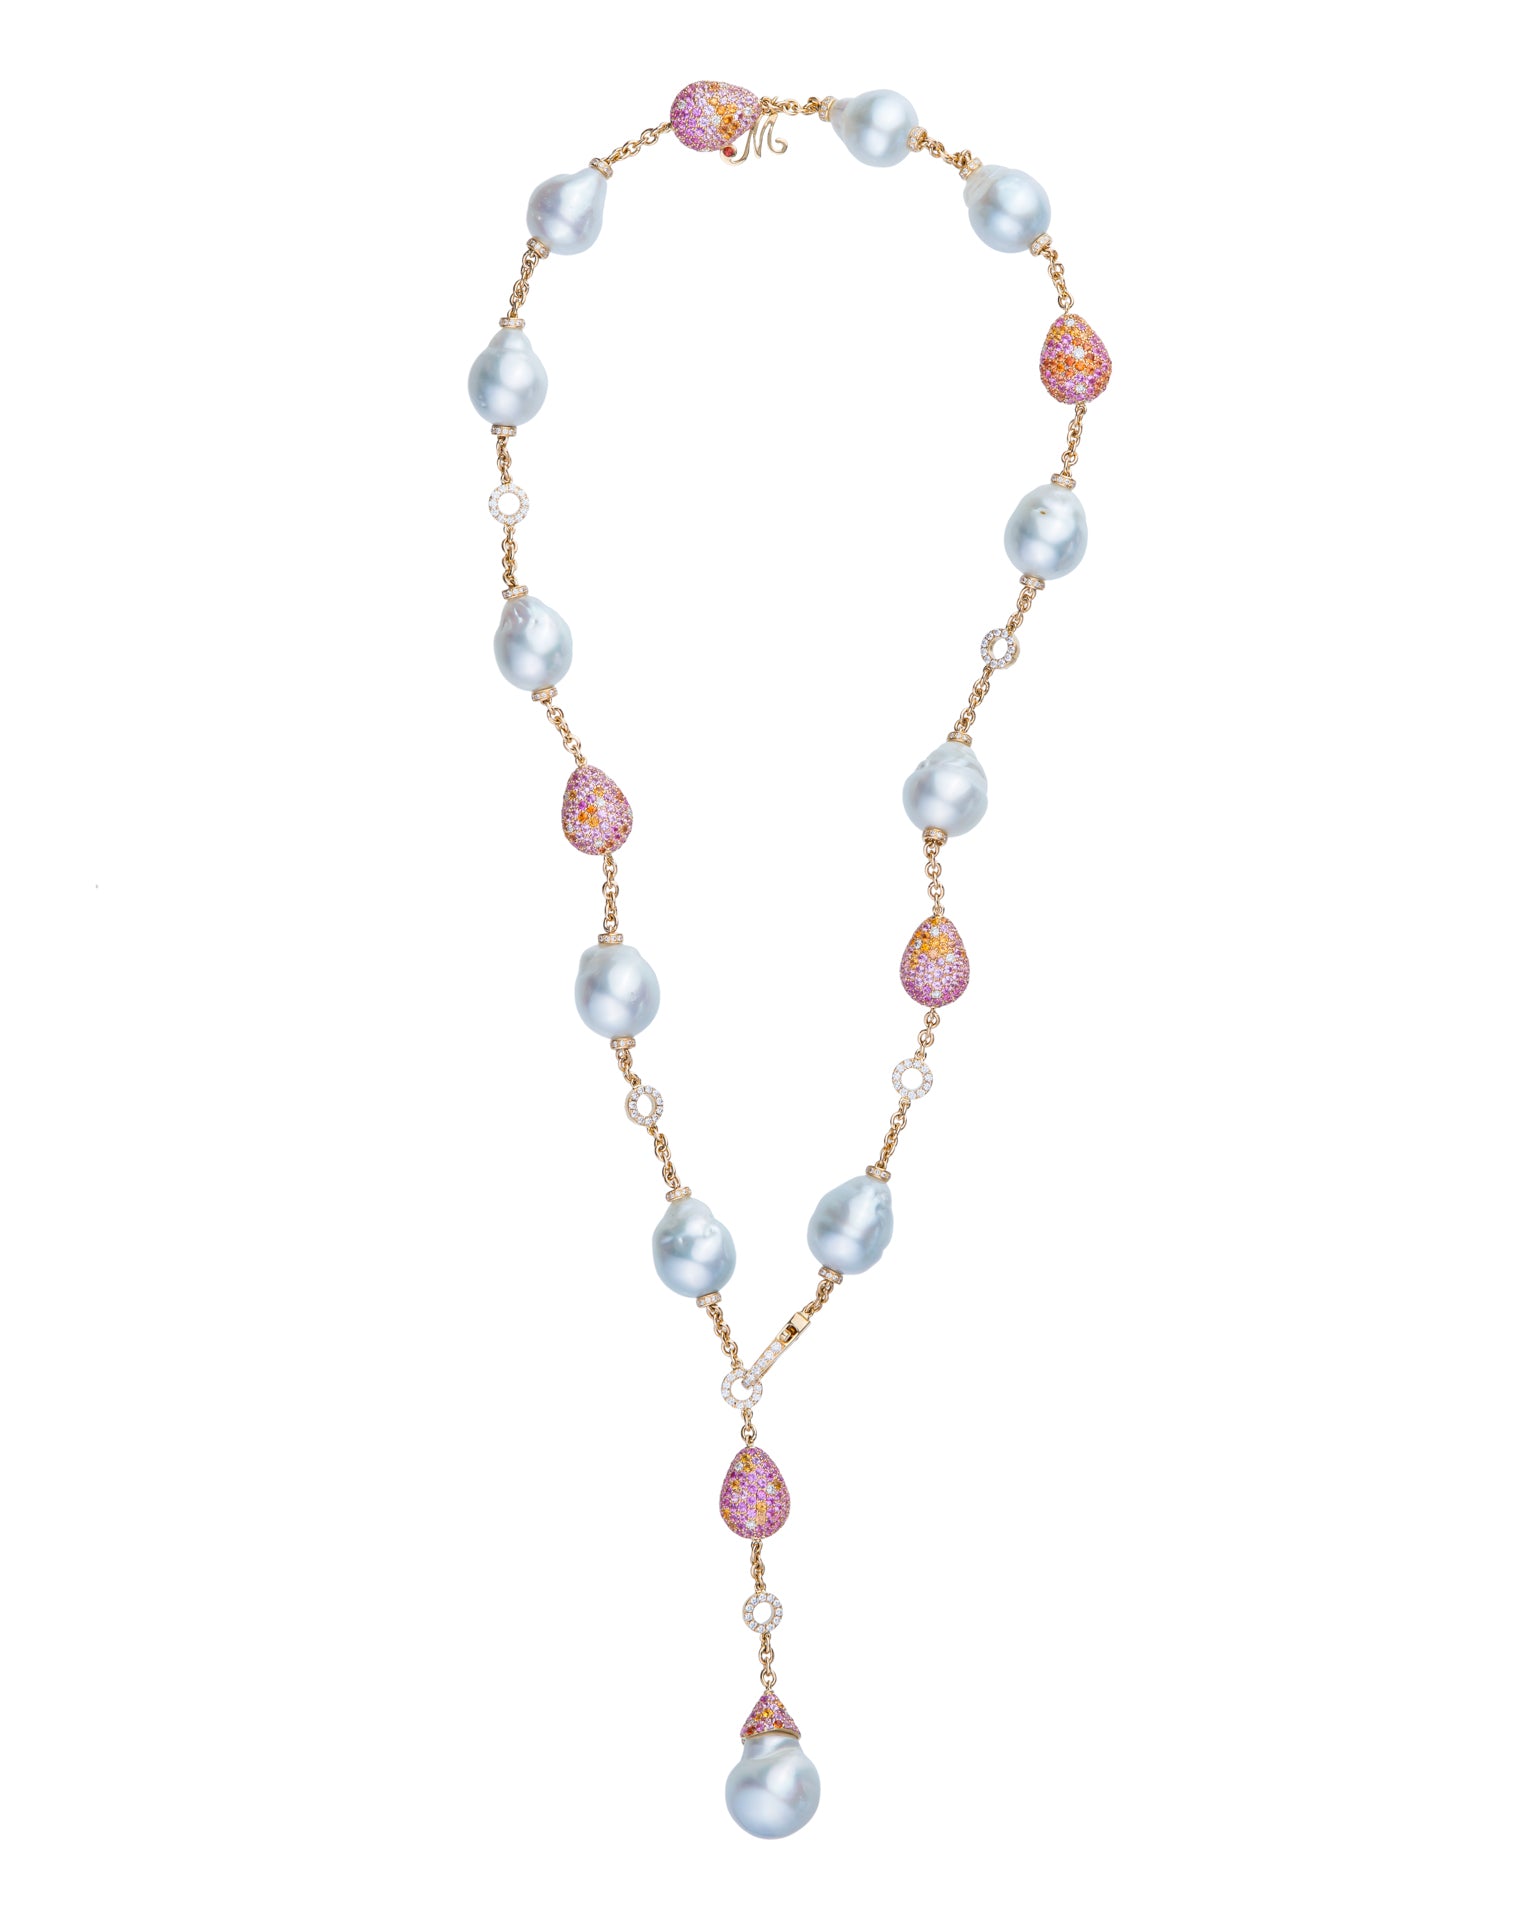 "Bliss" lariat necklace with Australian South Sea pearls and a pendant South Sea pearl with a myriad of gemstones, crafted in 18 karat yellow gold.